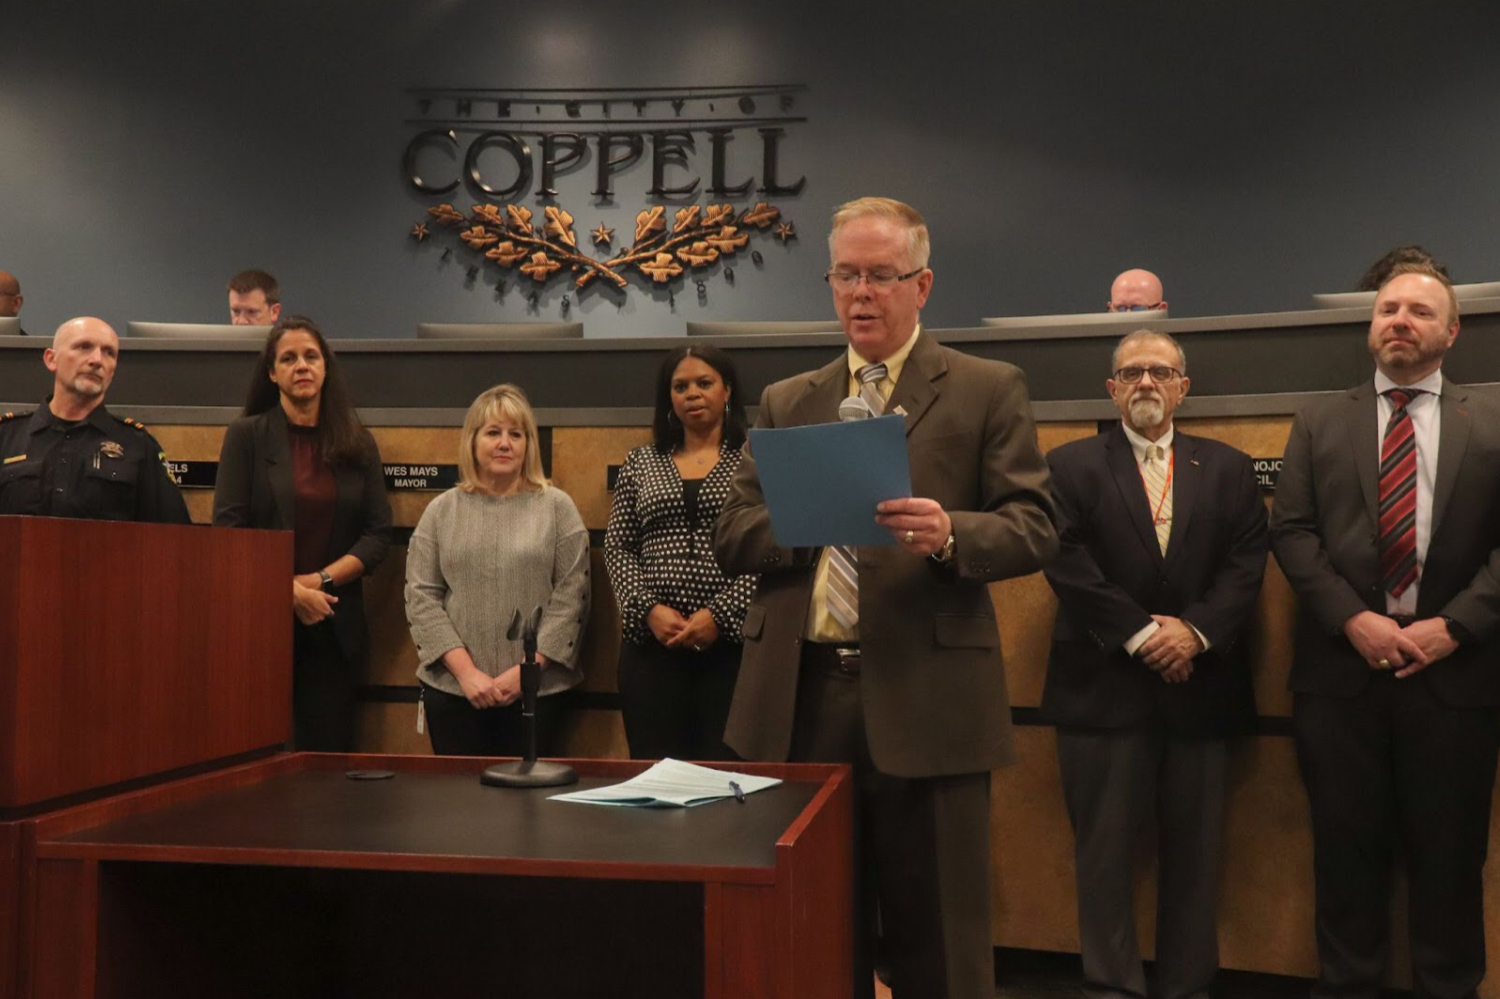 Coppell Mayor Wes Mays illustrates the Coppell Municipal Court’s role in preserving public safety at the Coppell City Council meeting. Coppell City Council met Tuesday at Town Center.
